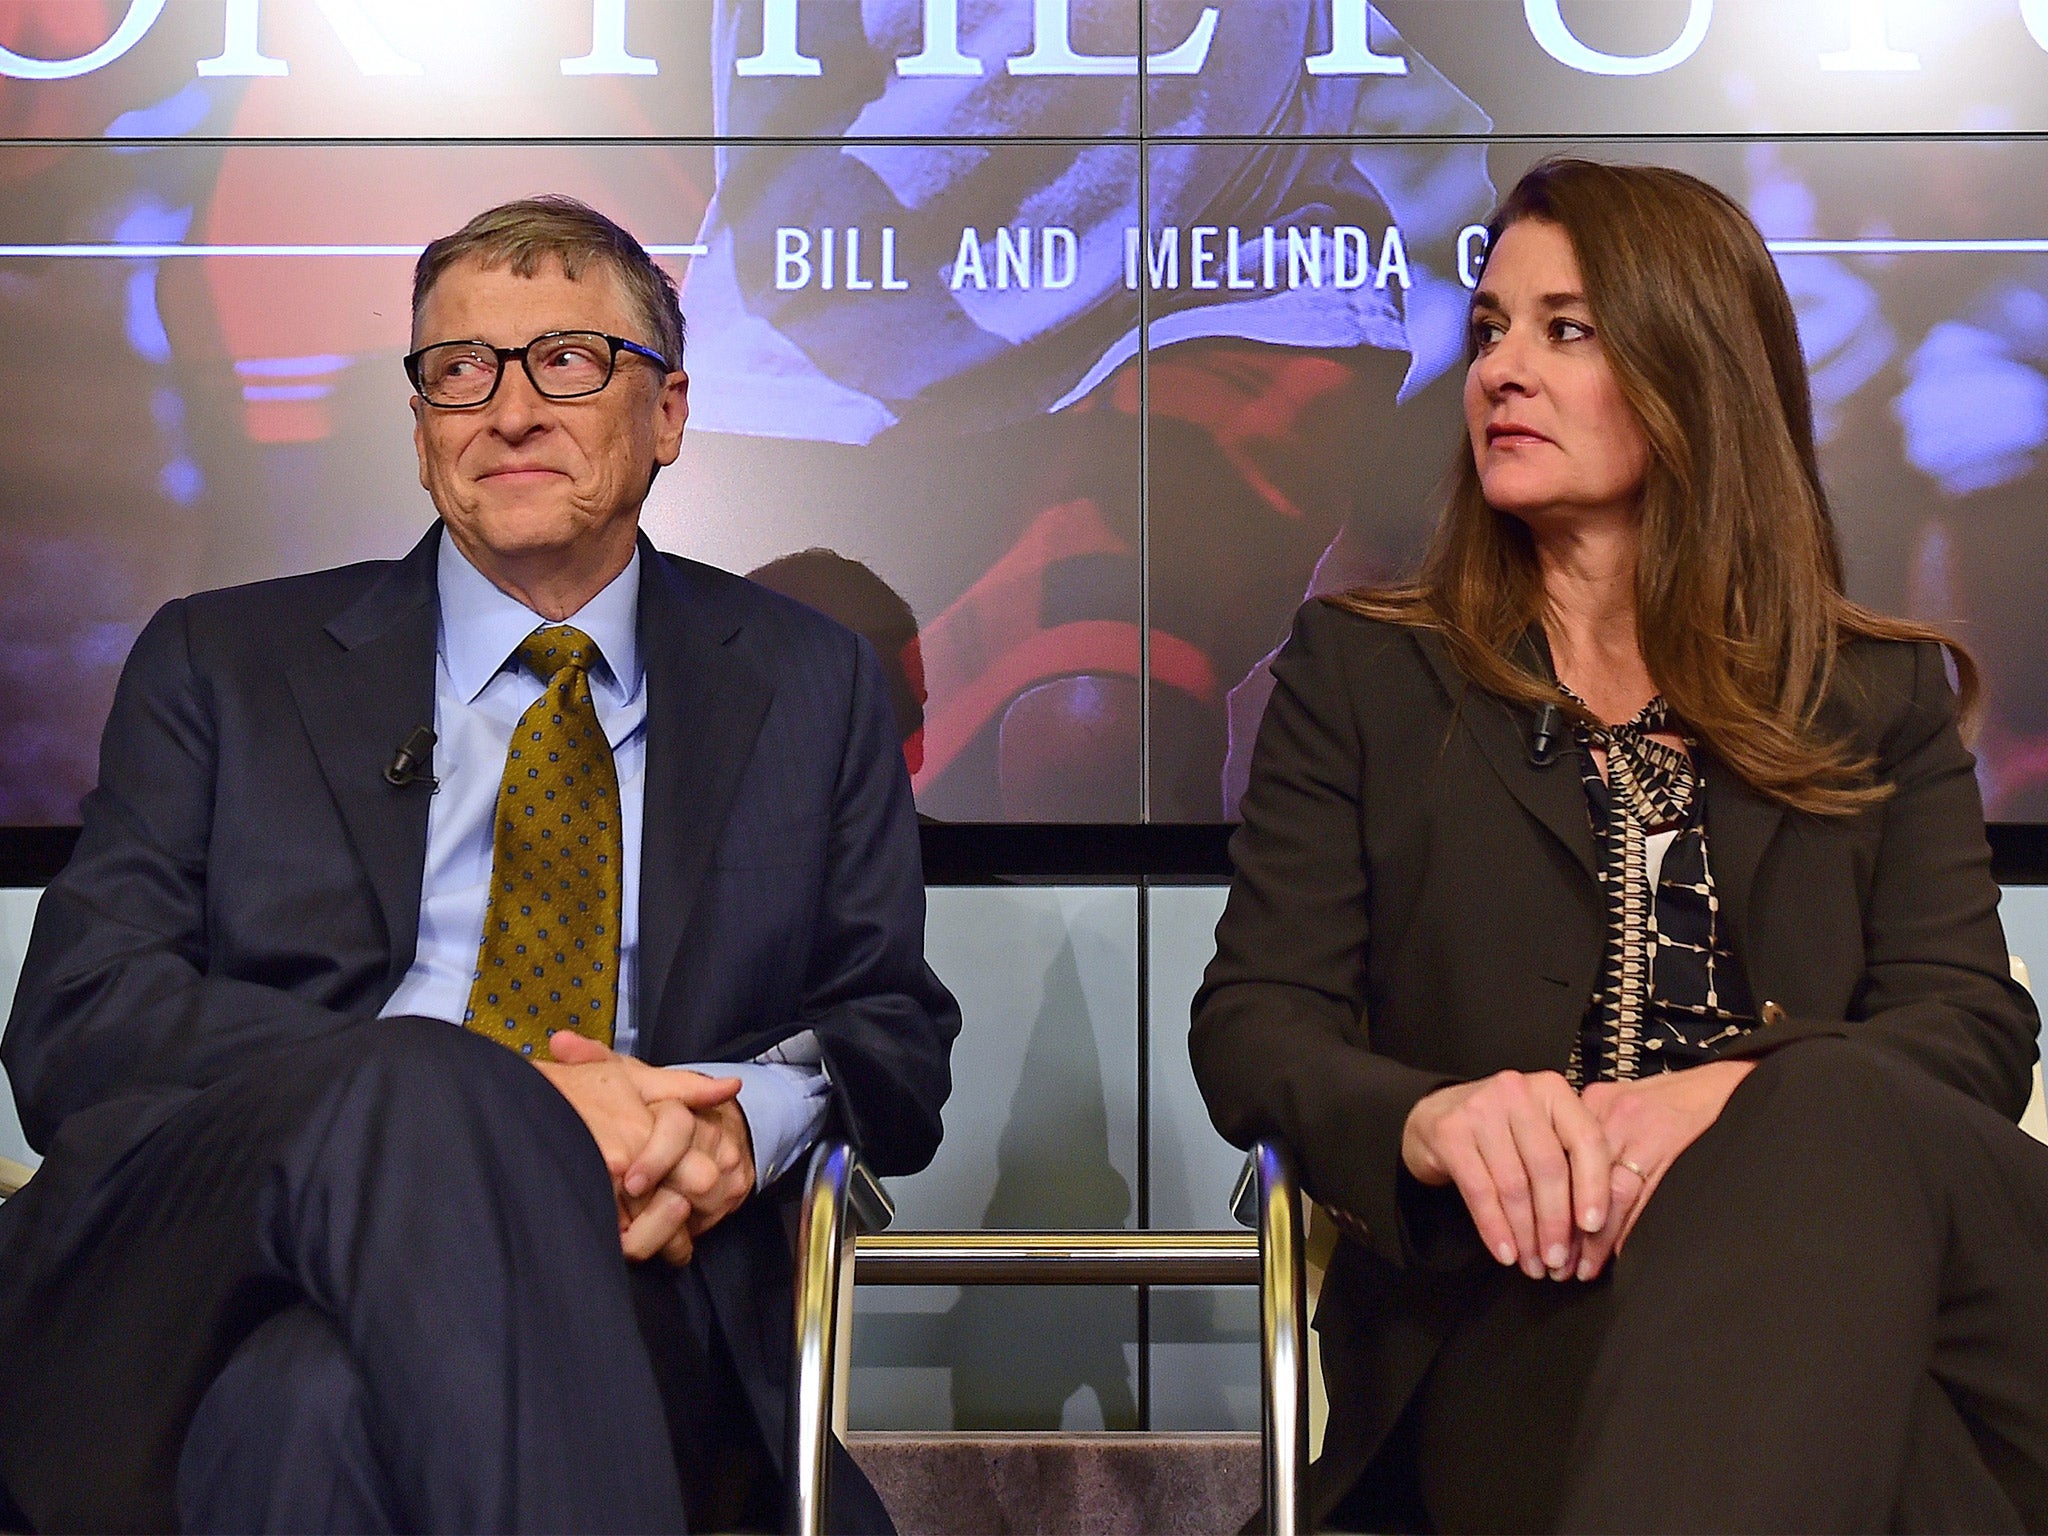 Bill Gates has published his annual letter on behalf of the Bill and Melinda Gates Foundation